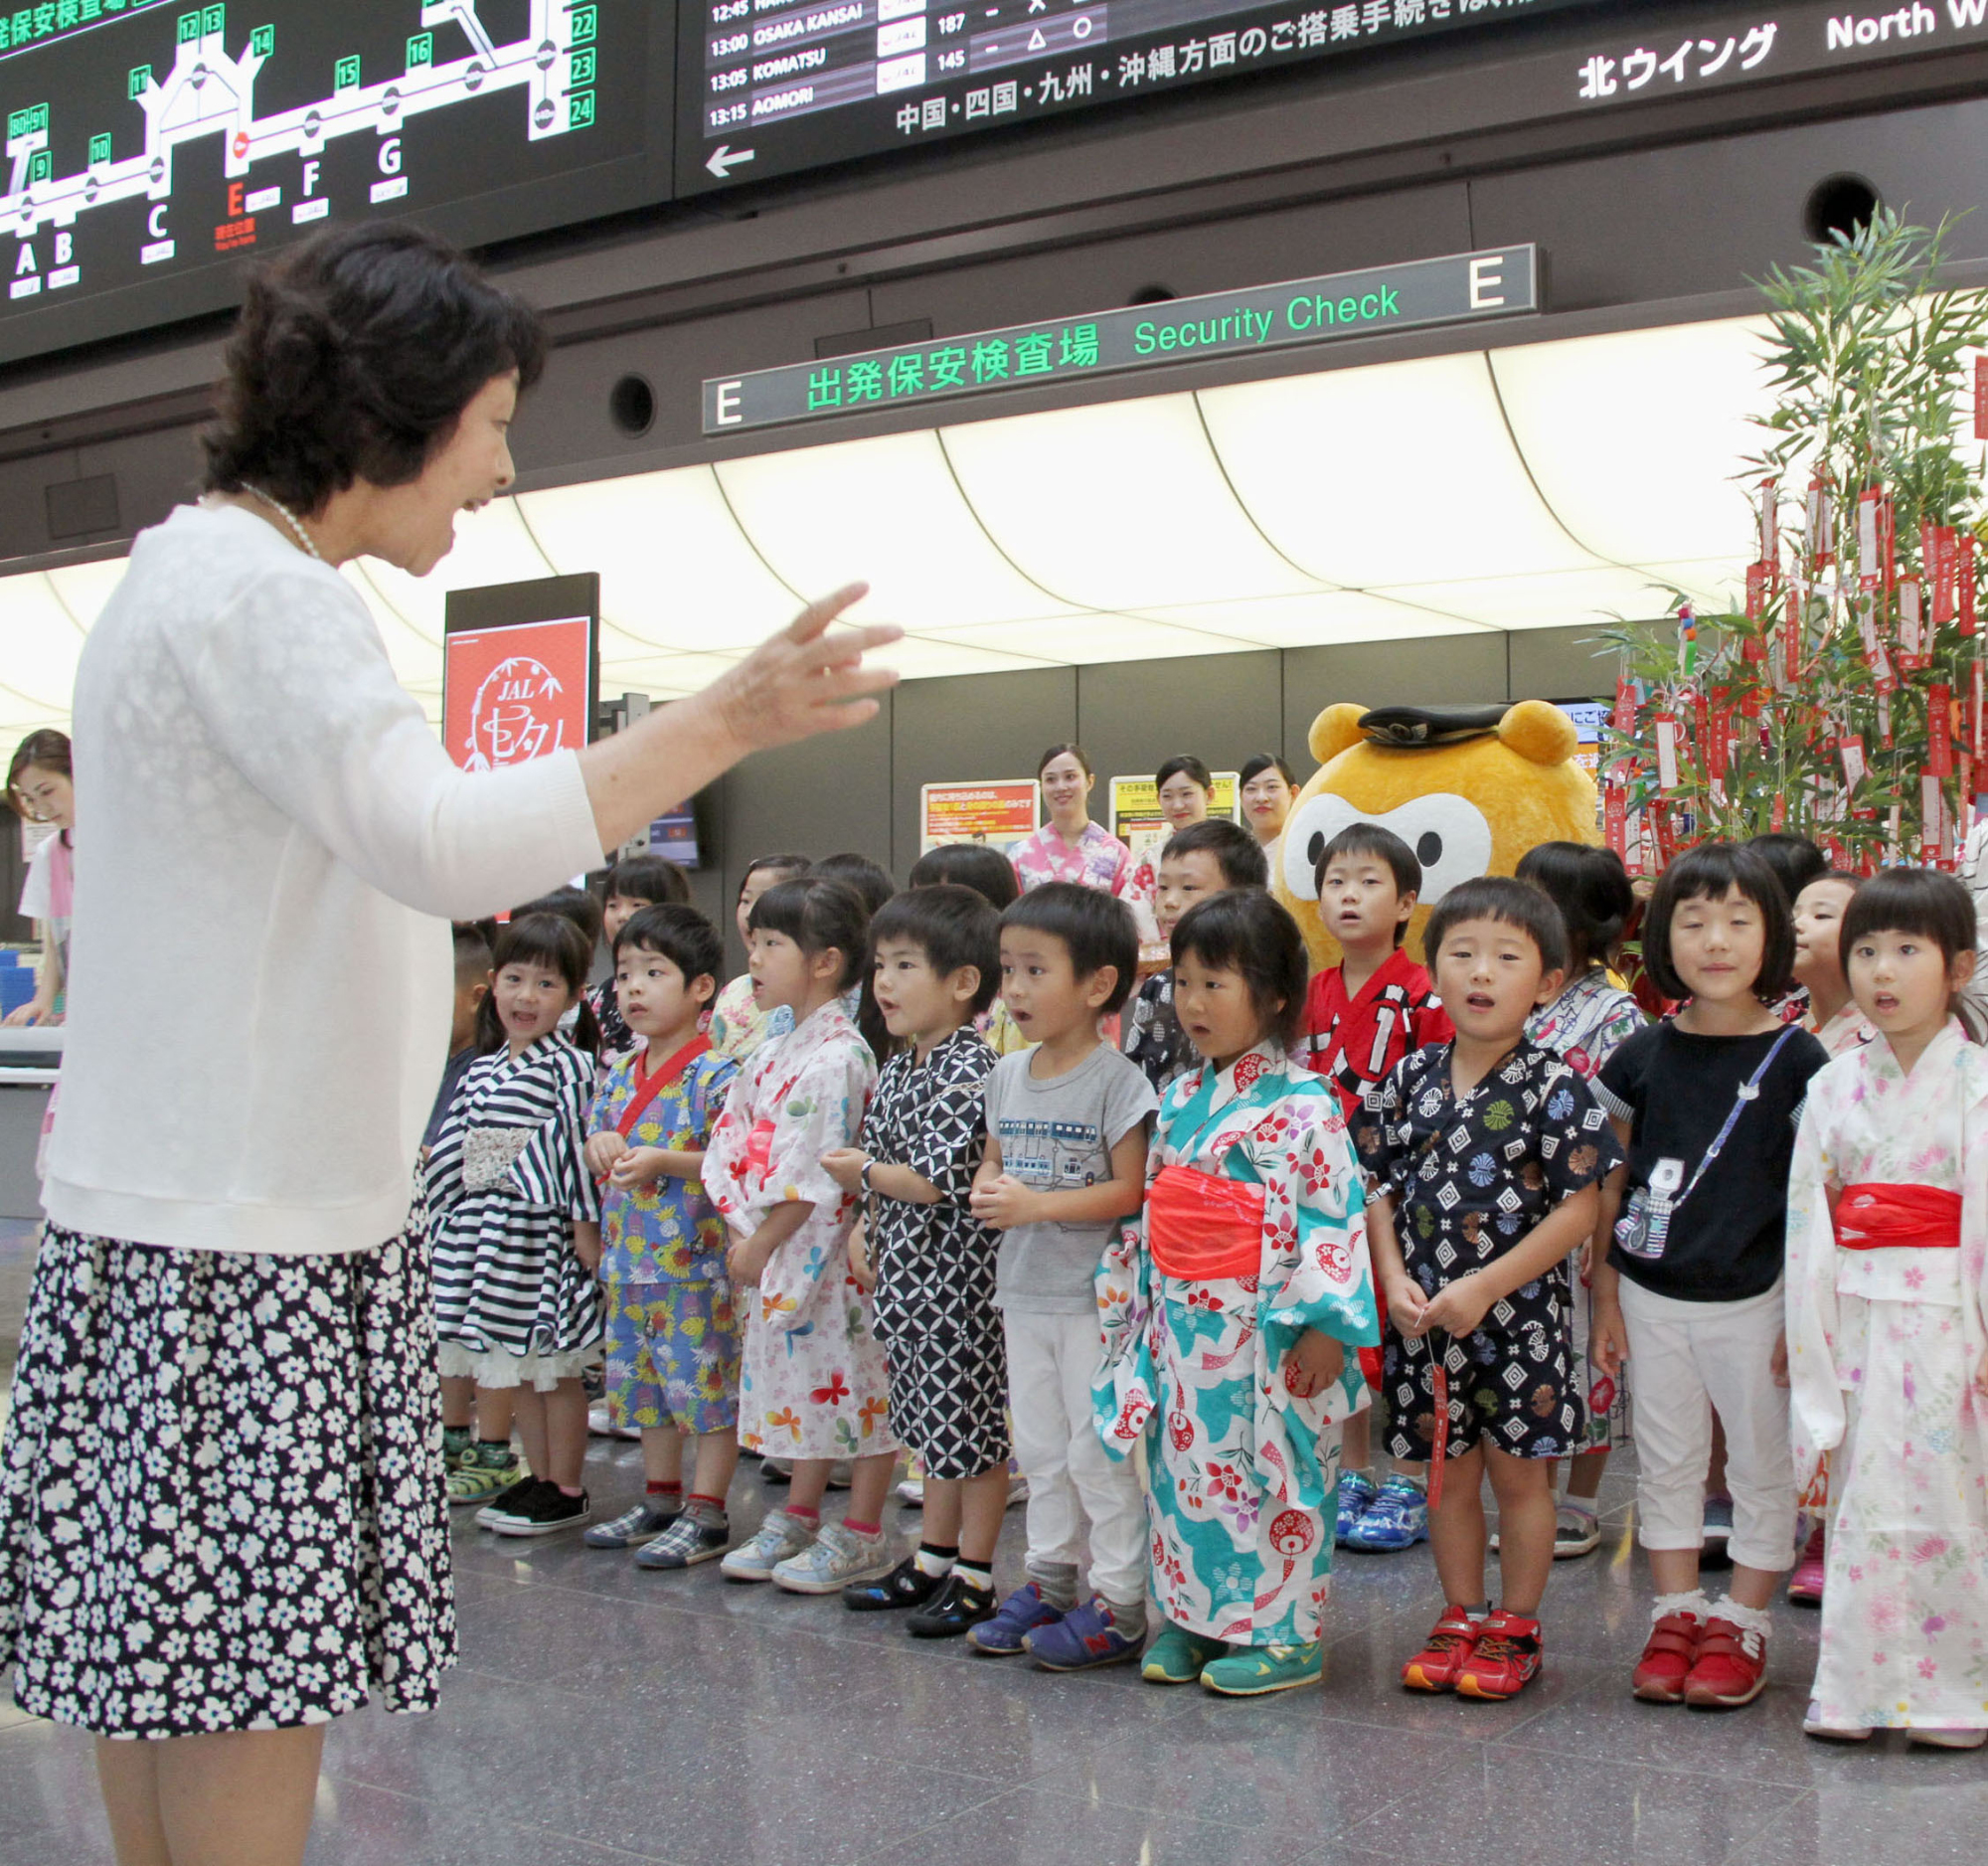 Children in a day care facility inside Haneda airport in Tokyo sing in the departure lobby of the international terminal in July. | KYODO